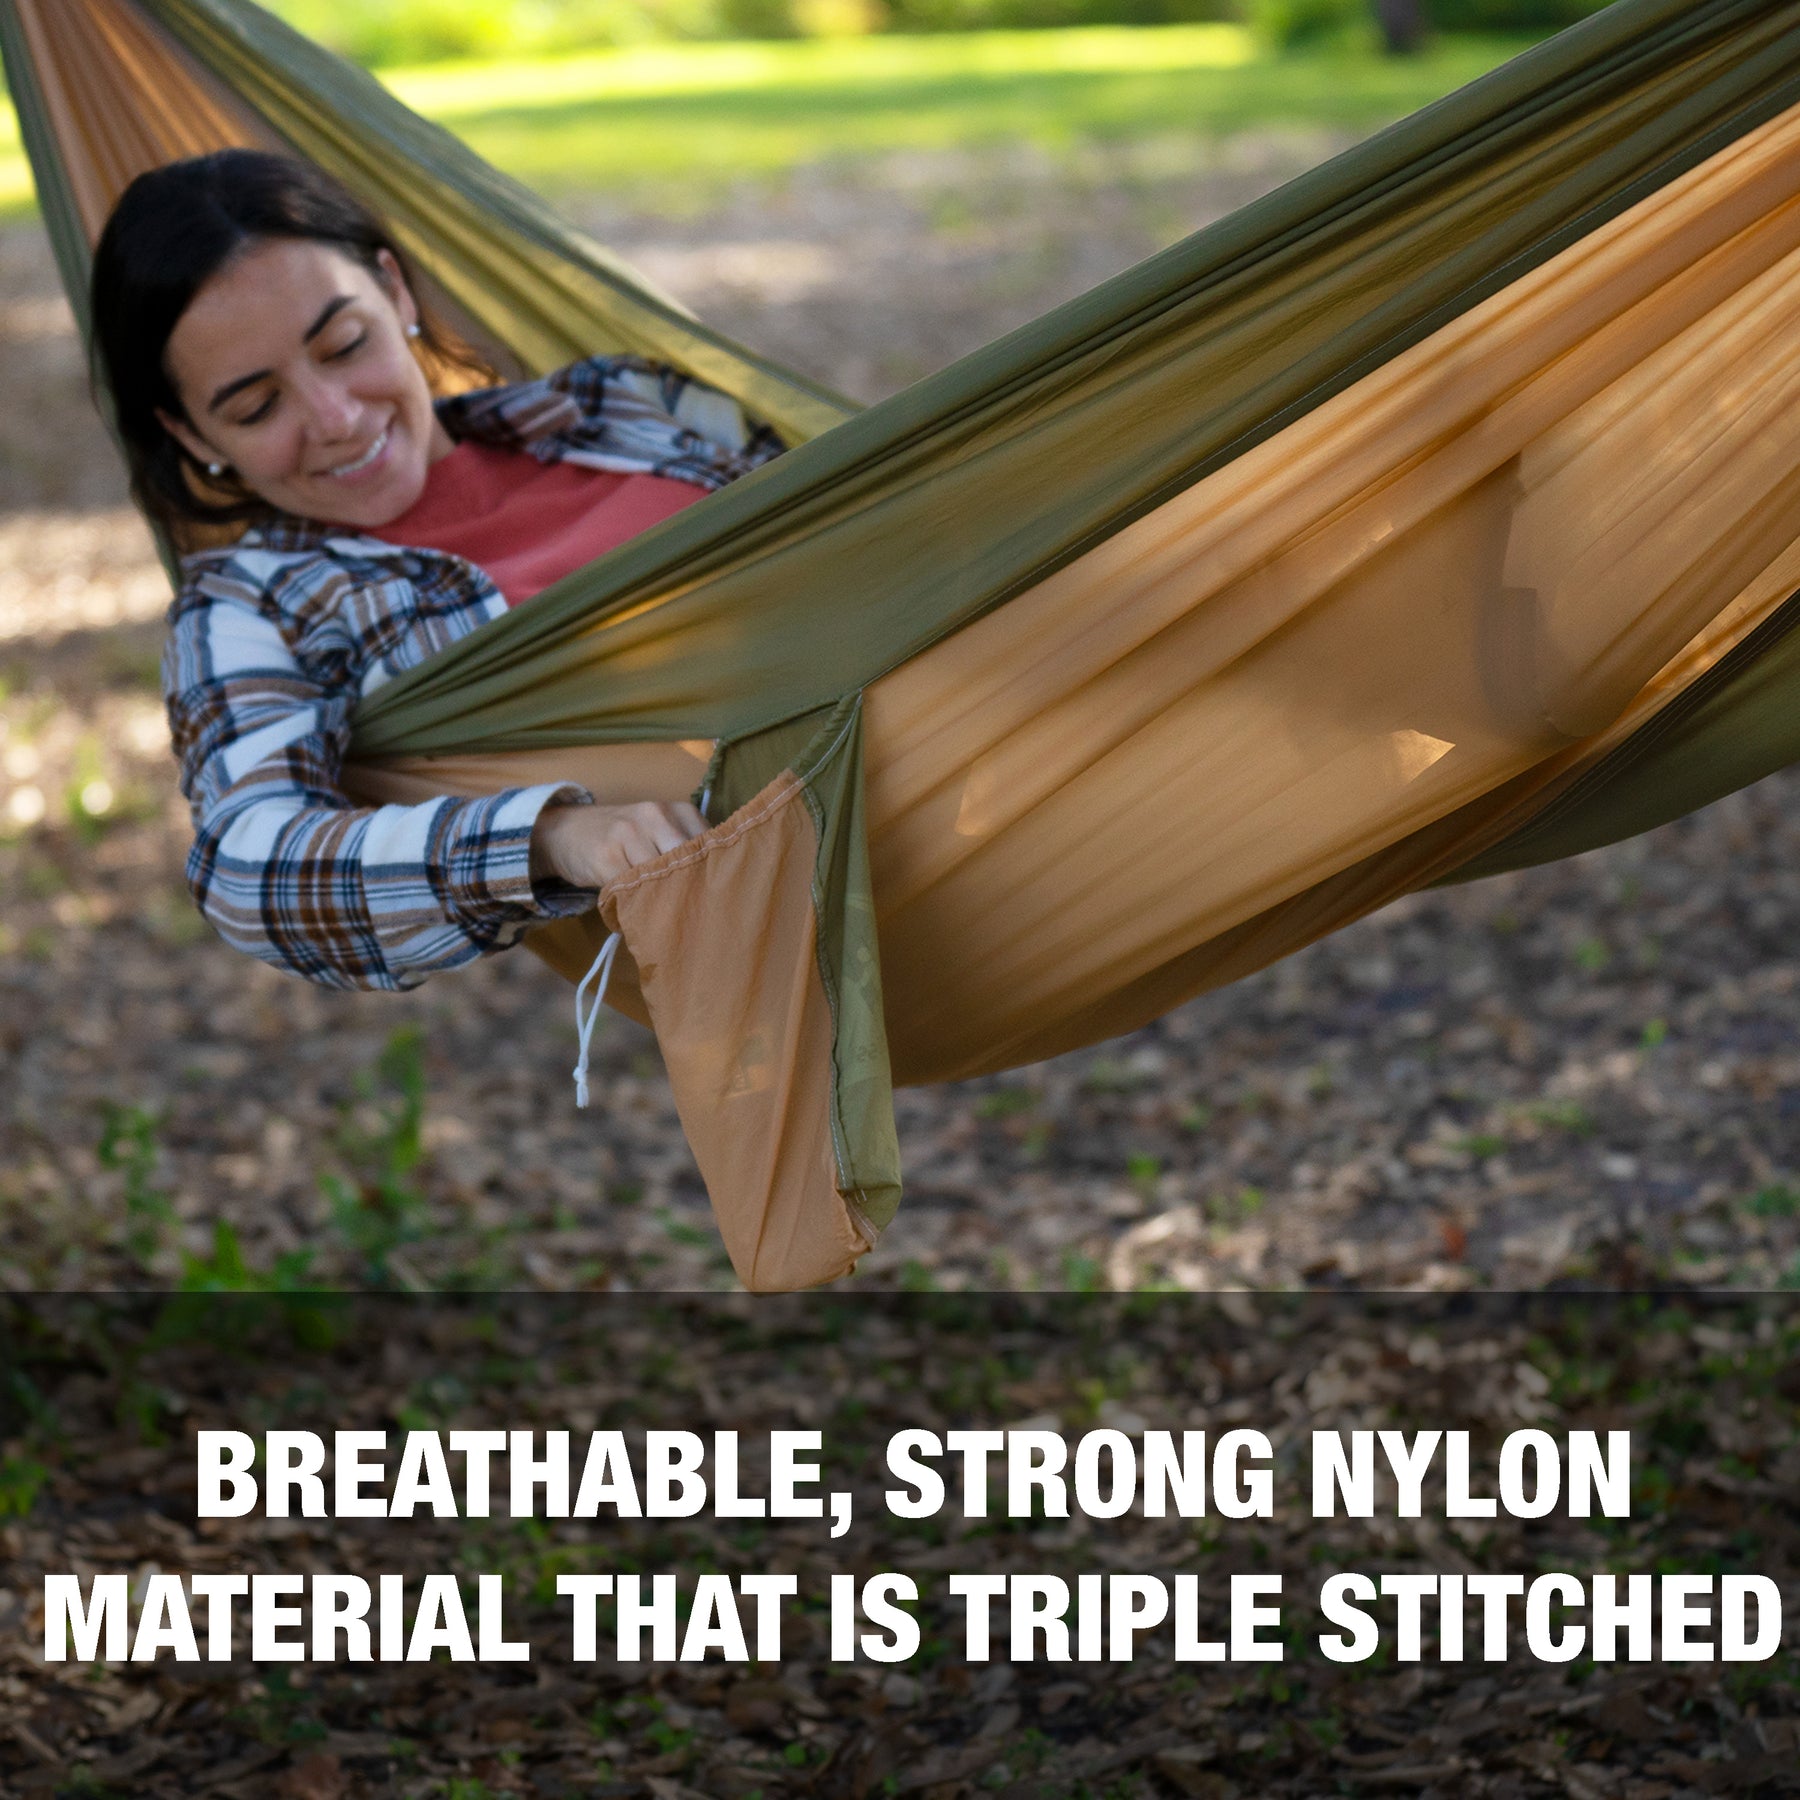 Bliss Hammocks 52-inch Wide Hammock in a Bag is made of breathable, strong nylon material that is triple stitched.